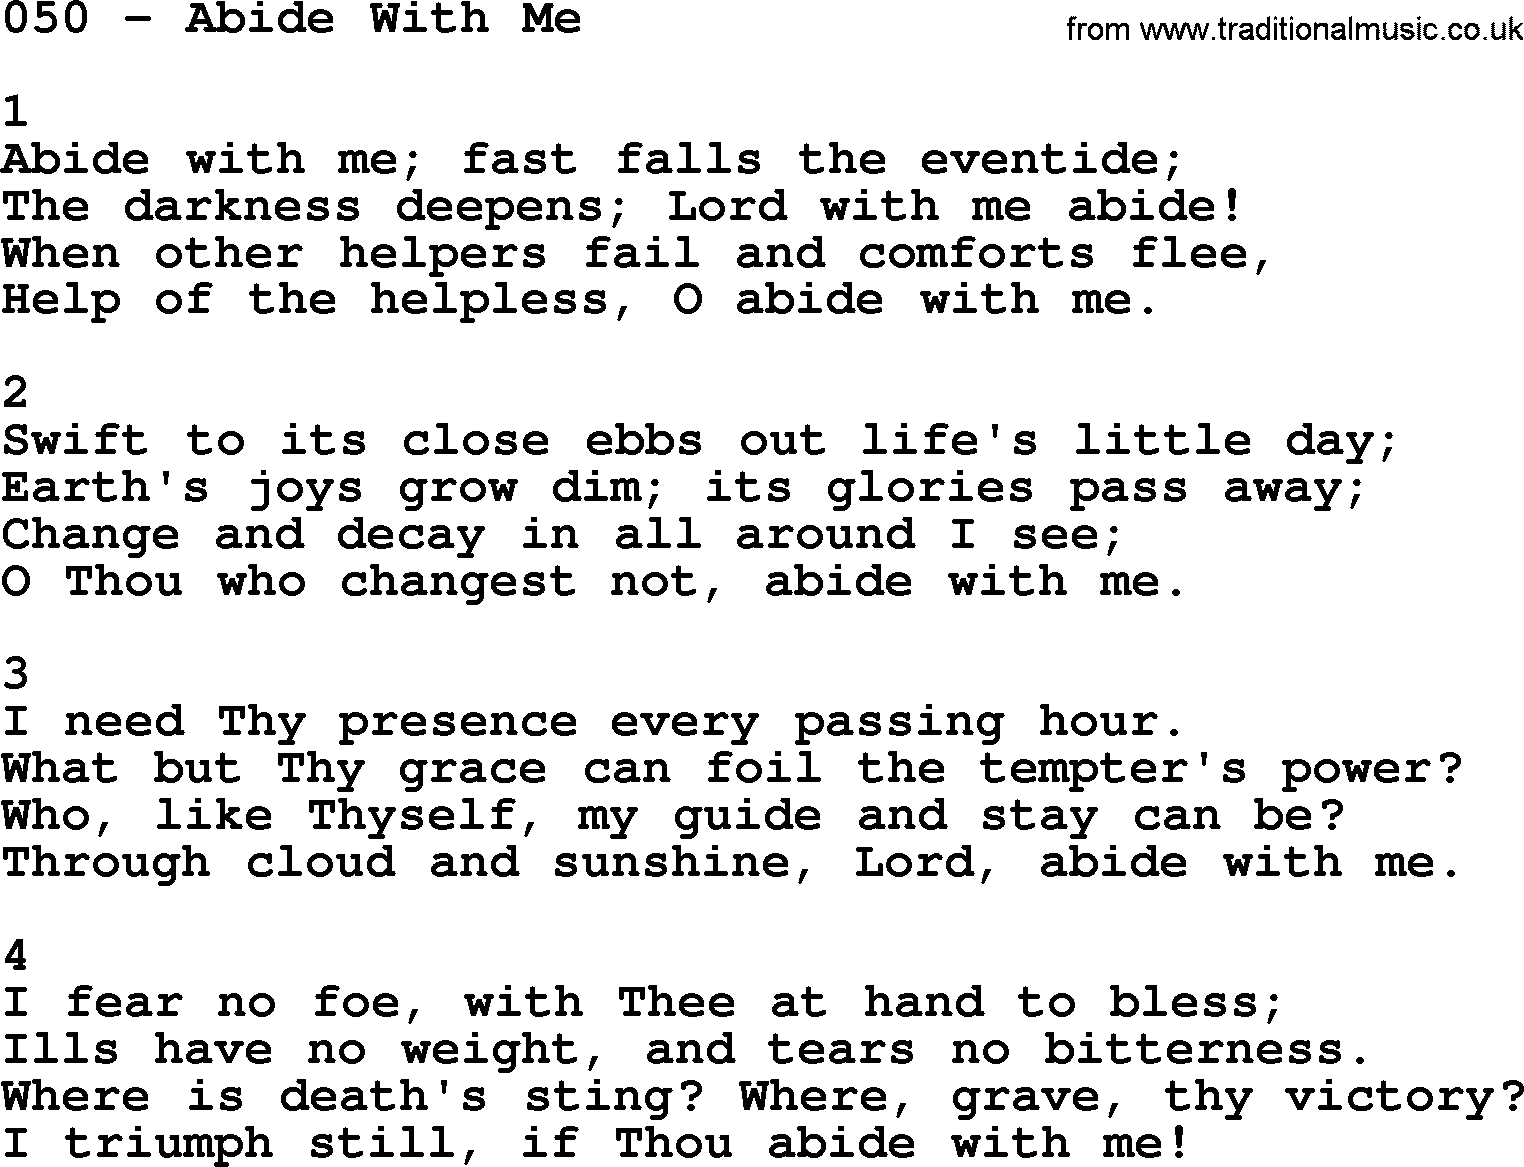 Complete Adventis Hymnal, title: 050-Abide With Me, with lyrics, midi, mp3, powerpoints(PPT) and PDF,